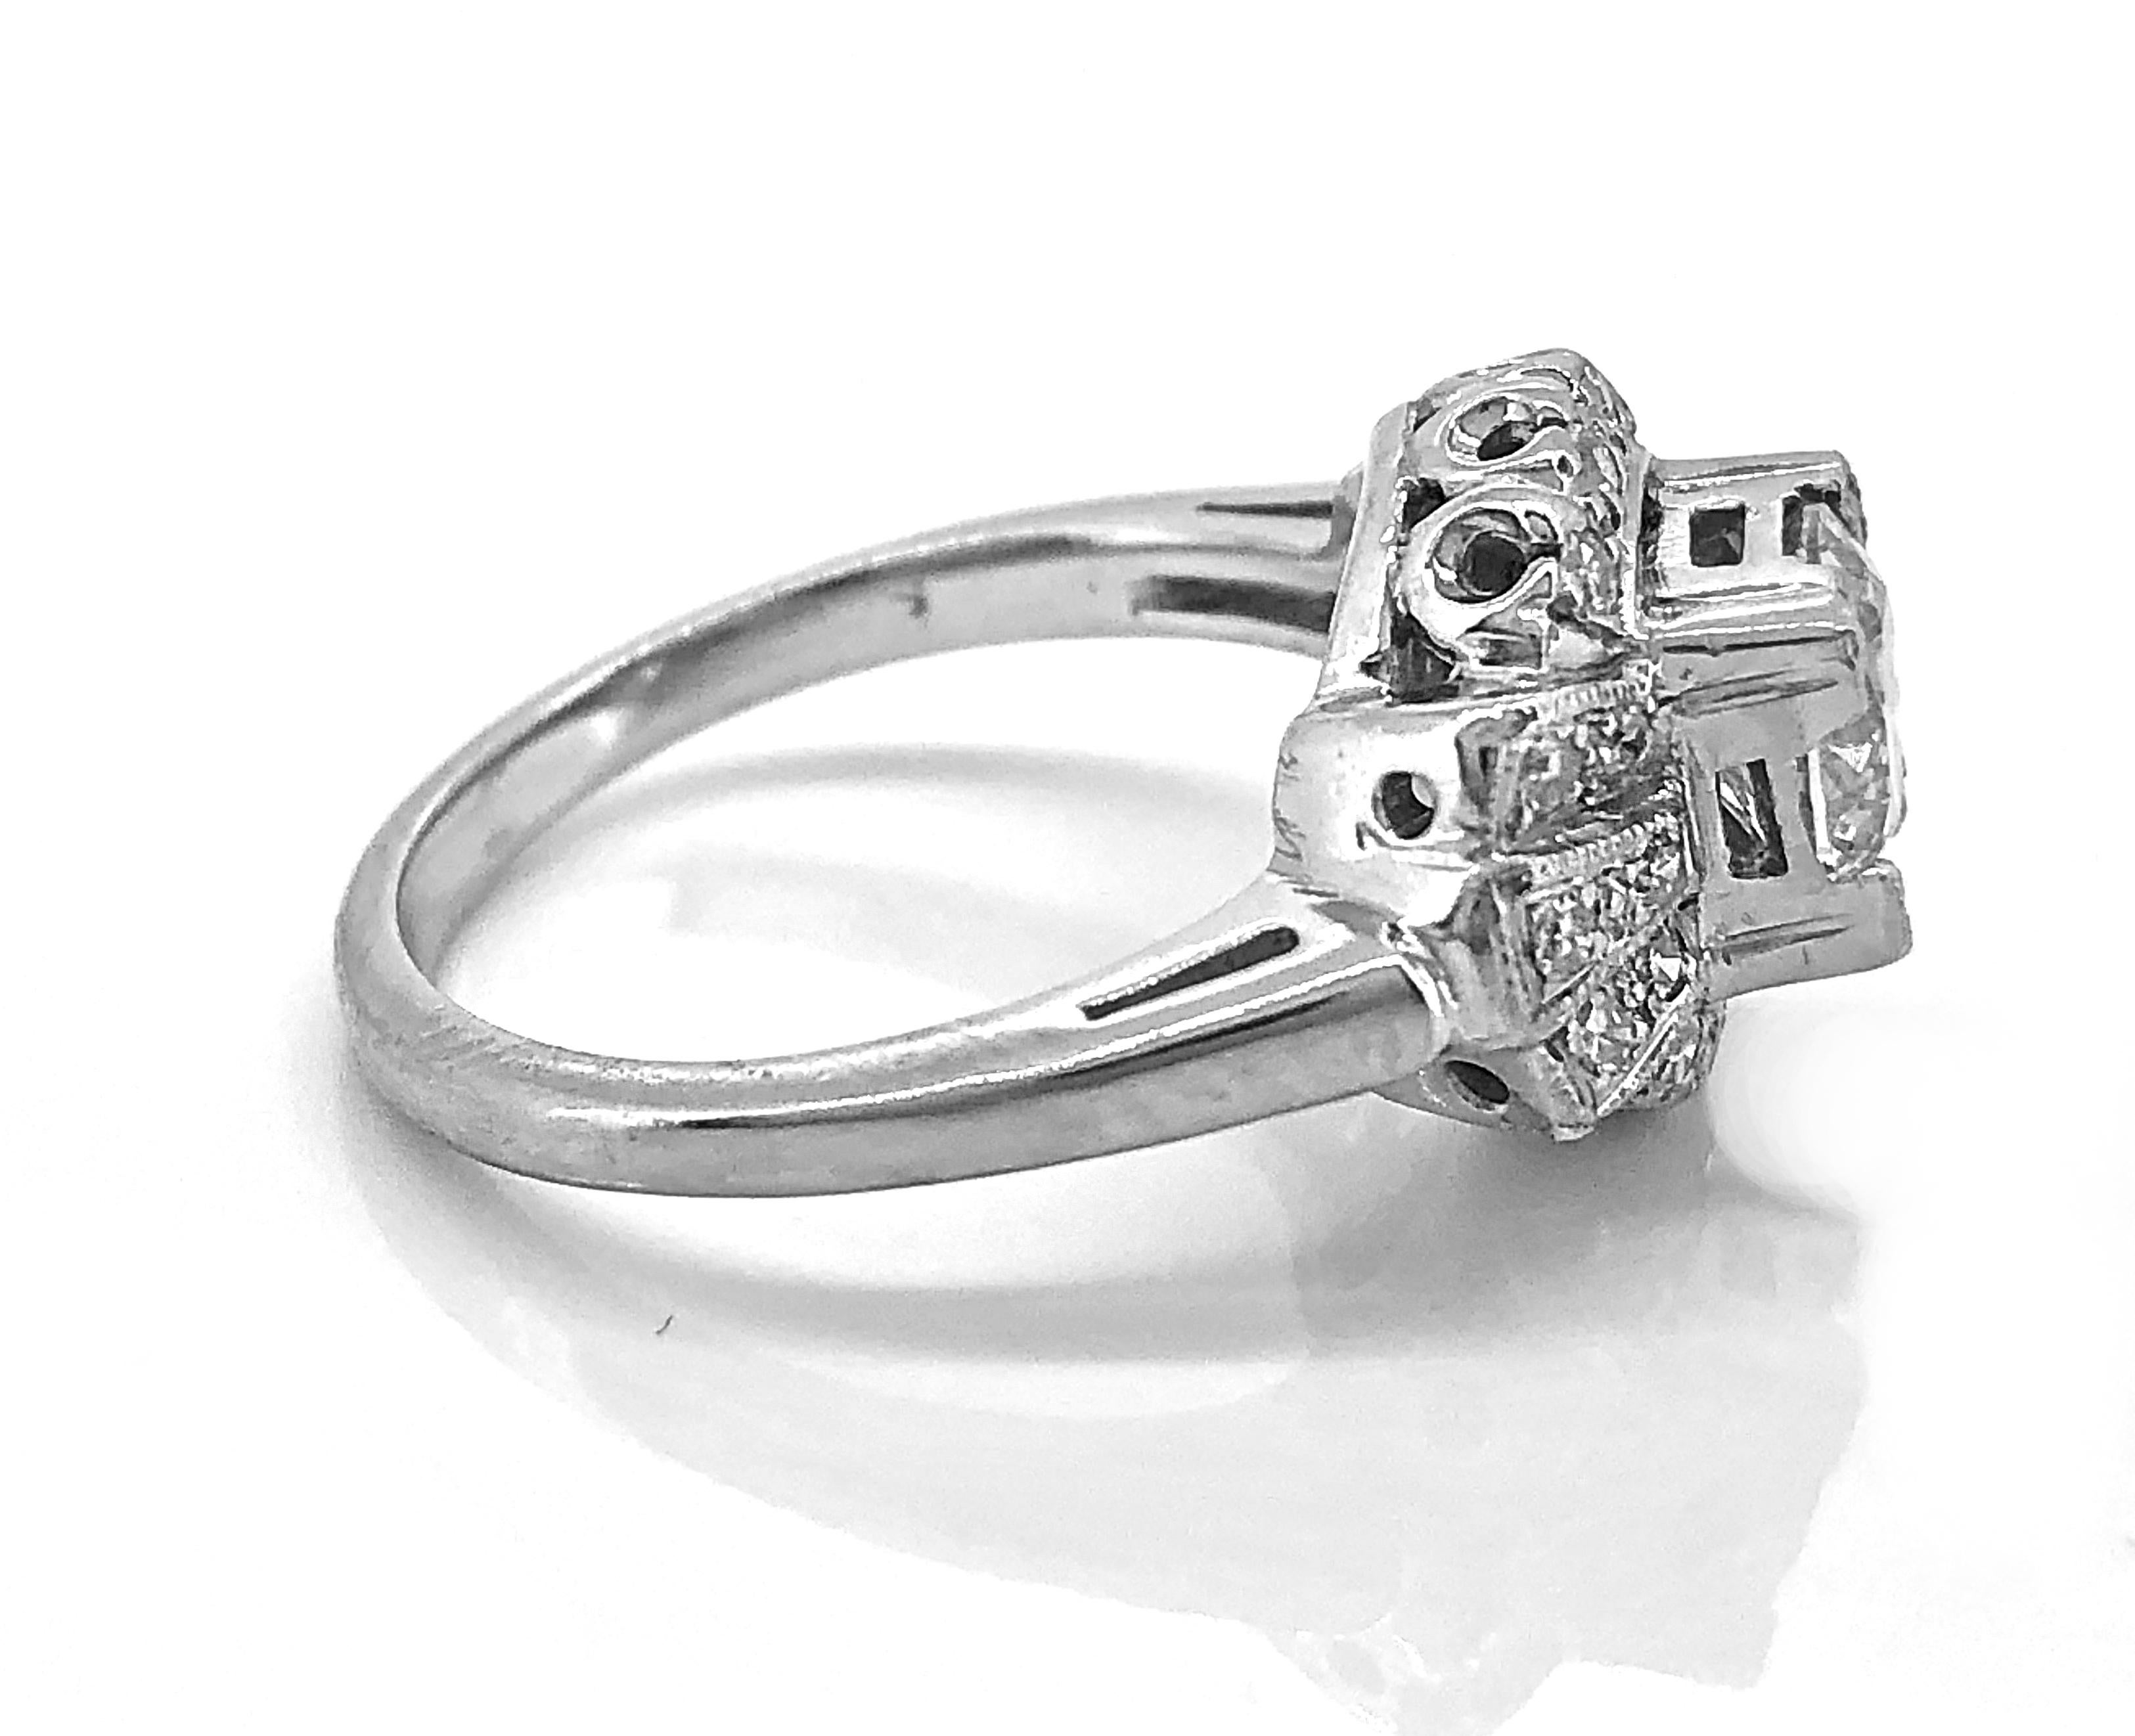 An antique engagement ring crafted in 14K white gold and features a .95ct. apx. European cut center diamond with I1 clarity (100% eye clean) and K color. The center diamond is set with trefoil prongs giving the ring its square look. Additionally,